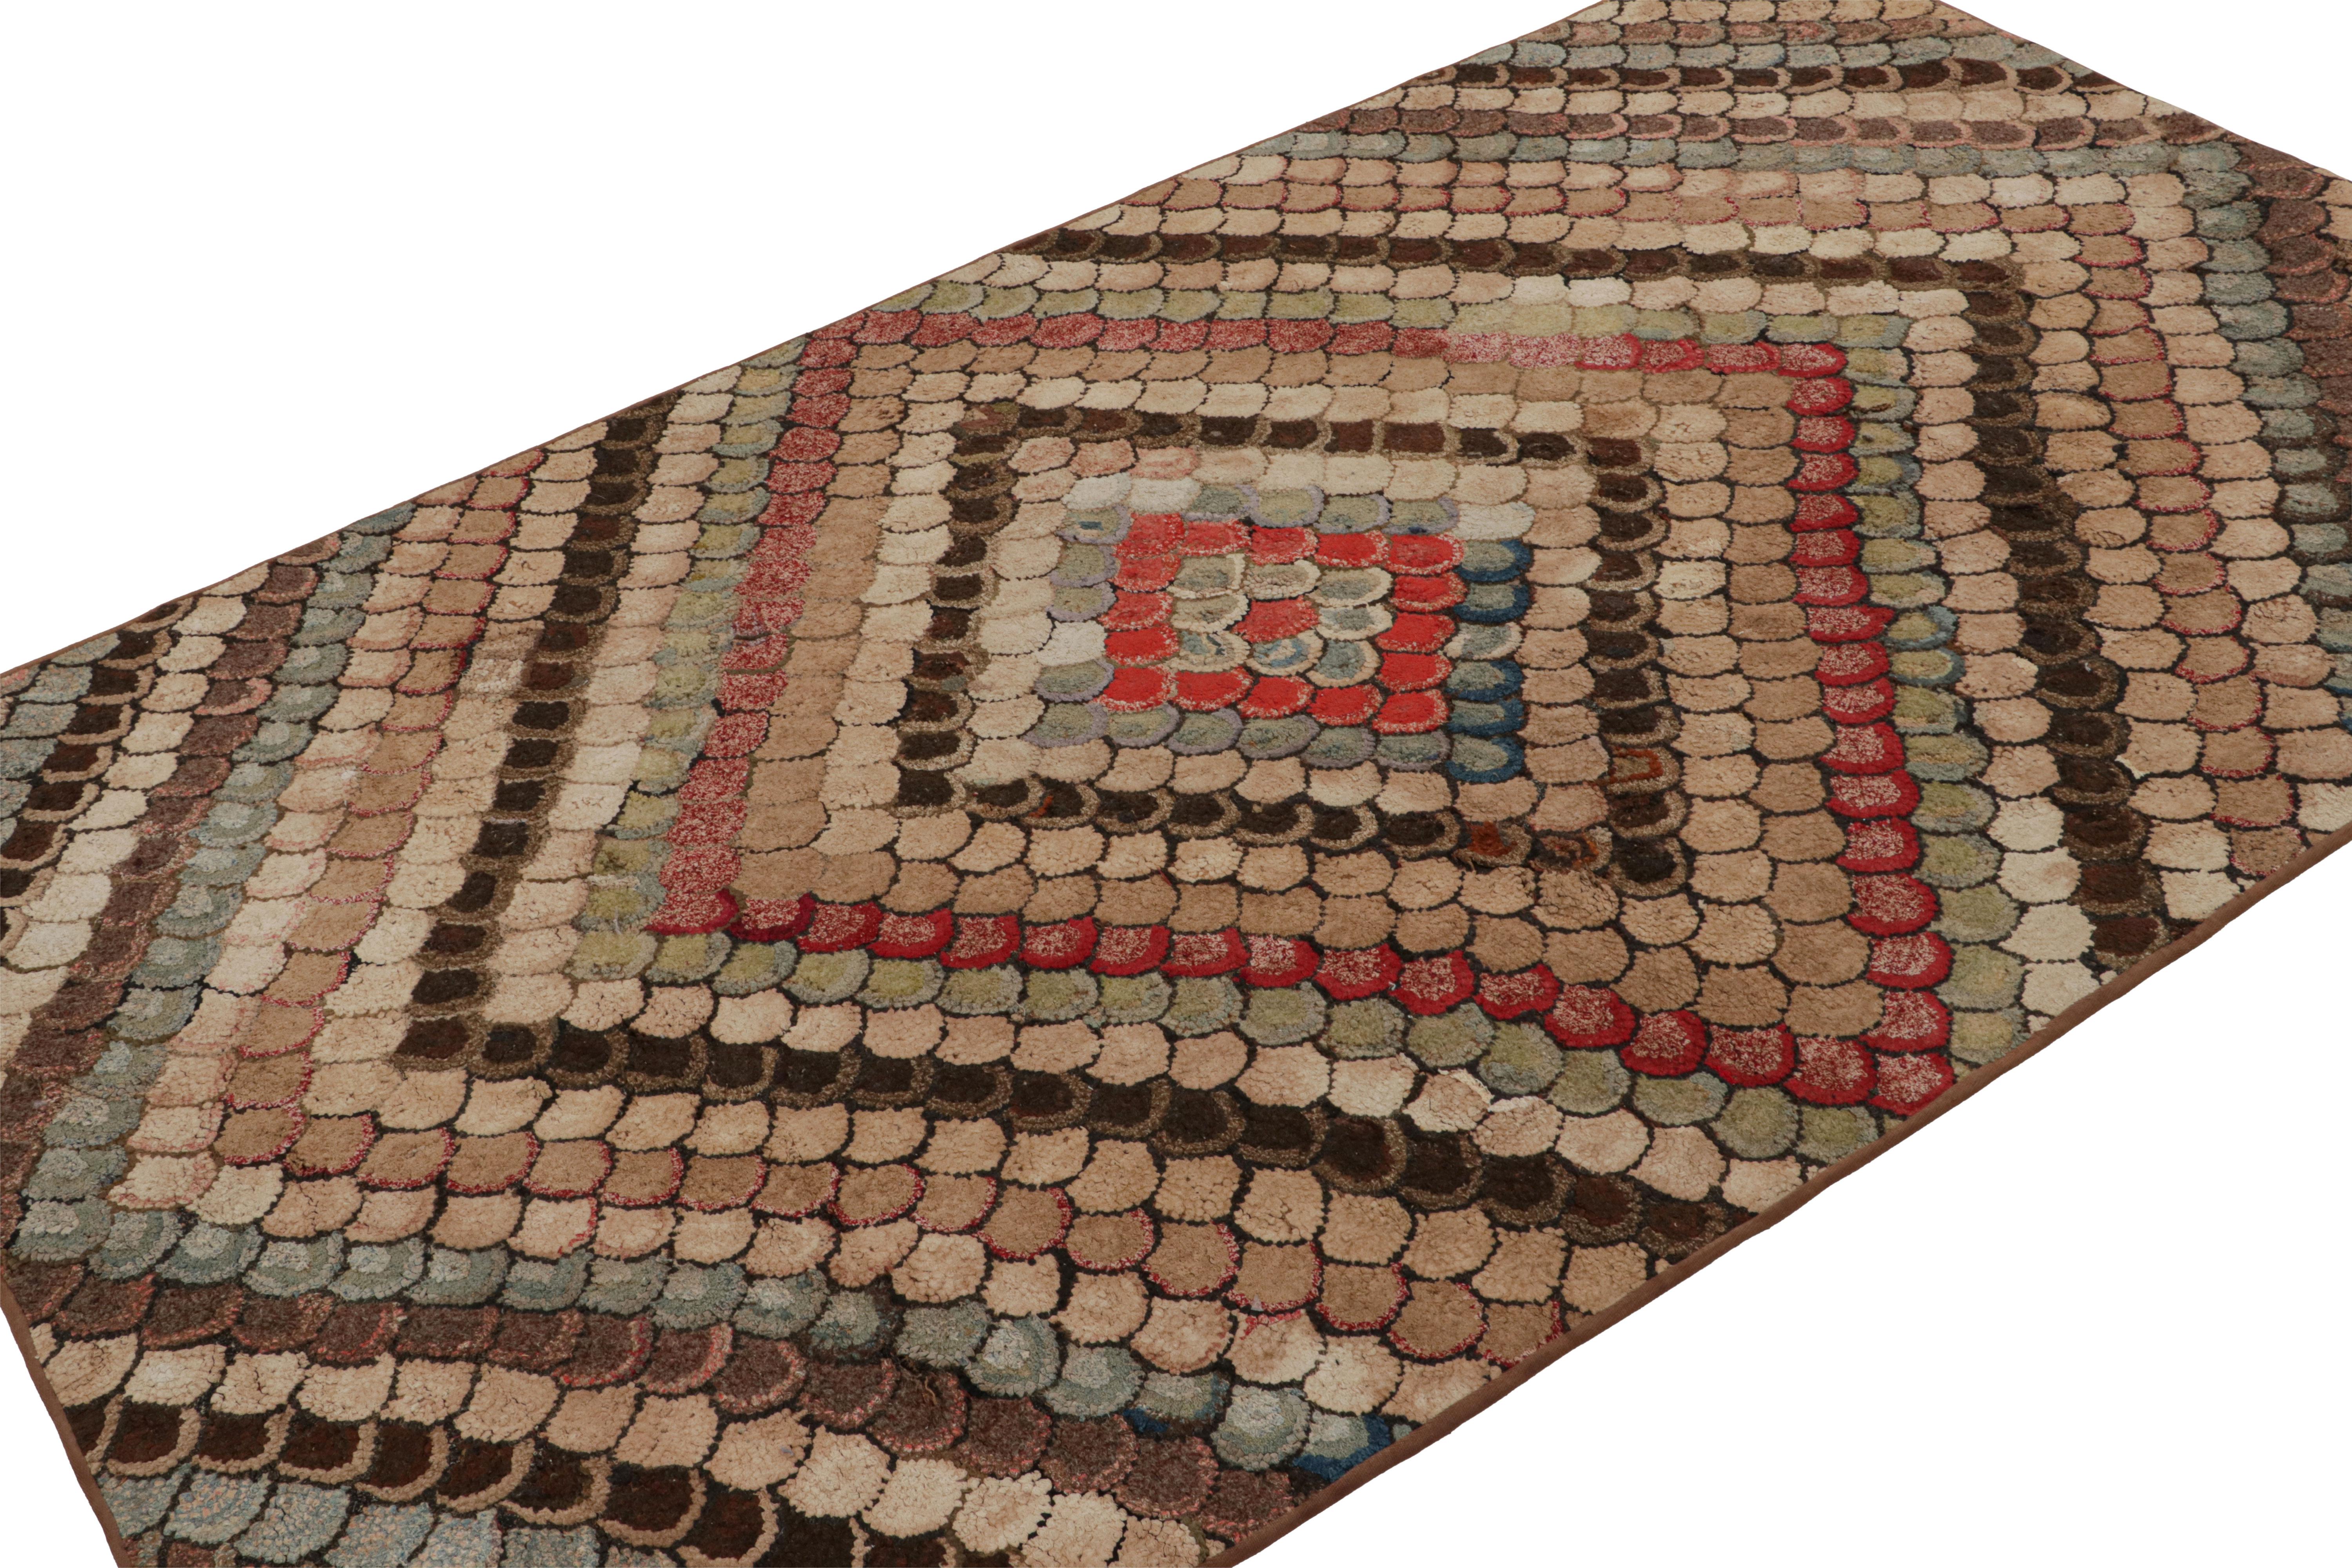 A rare 4x6 antique hooked rug of United States’ provenance, handmade in wool and fabric, circa 1920-1930, featuring polychromatic geometric patterns. 

On the Design: 

This collectible piece enjoys geometric patterns in a polychromatic colorway.